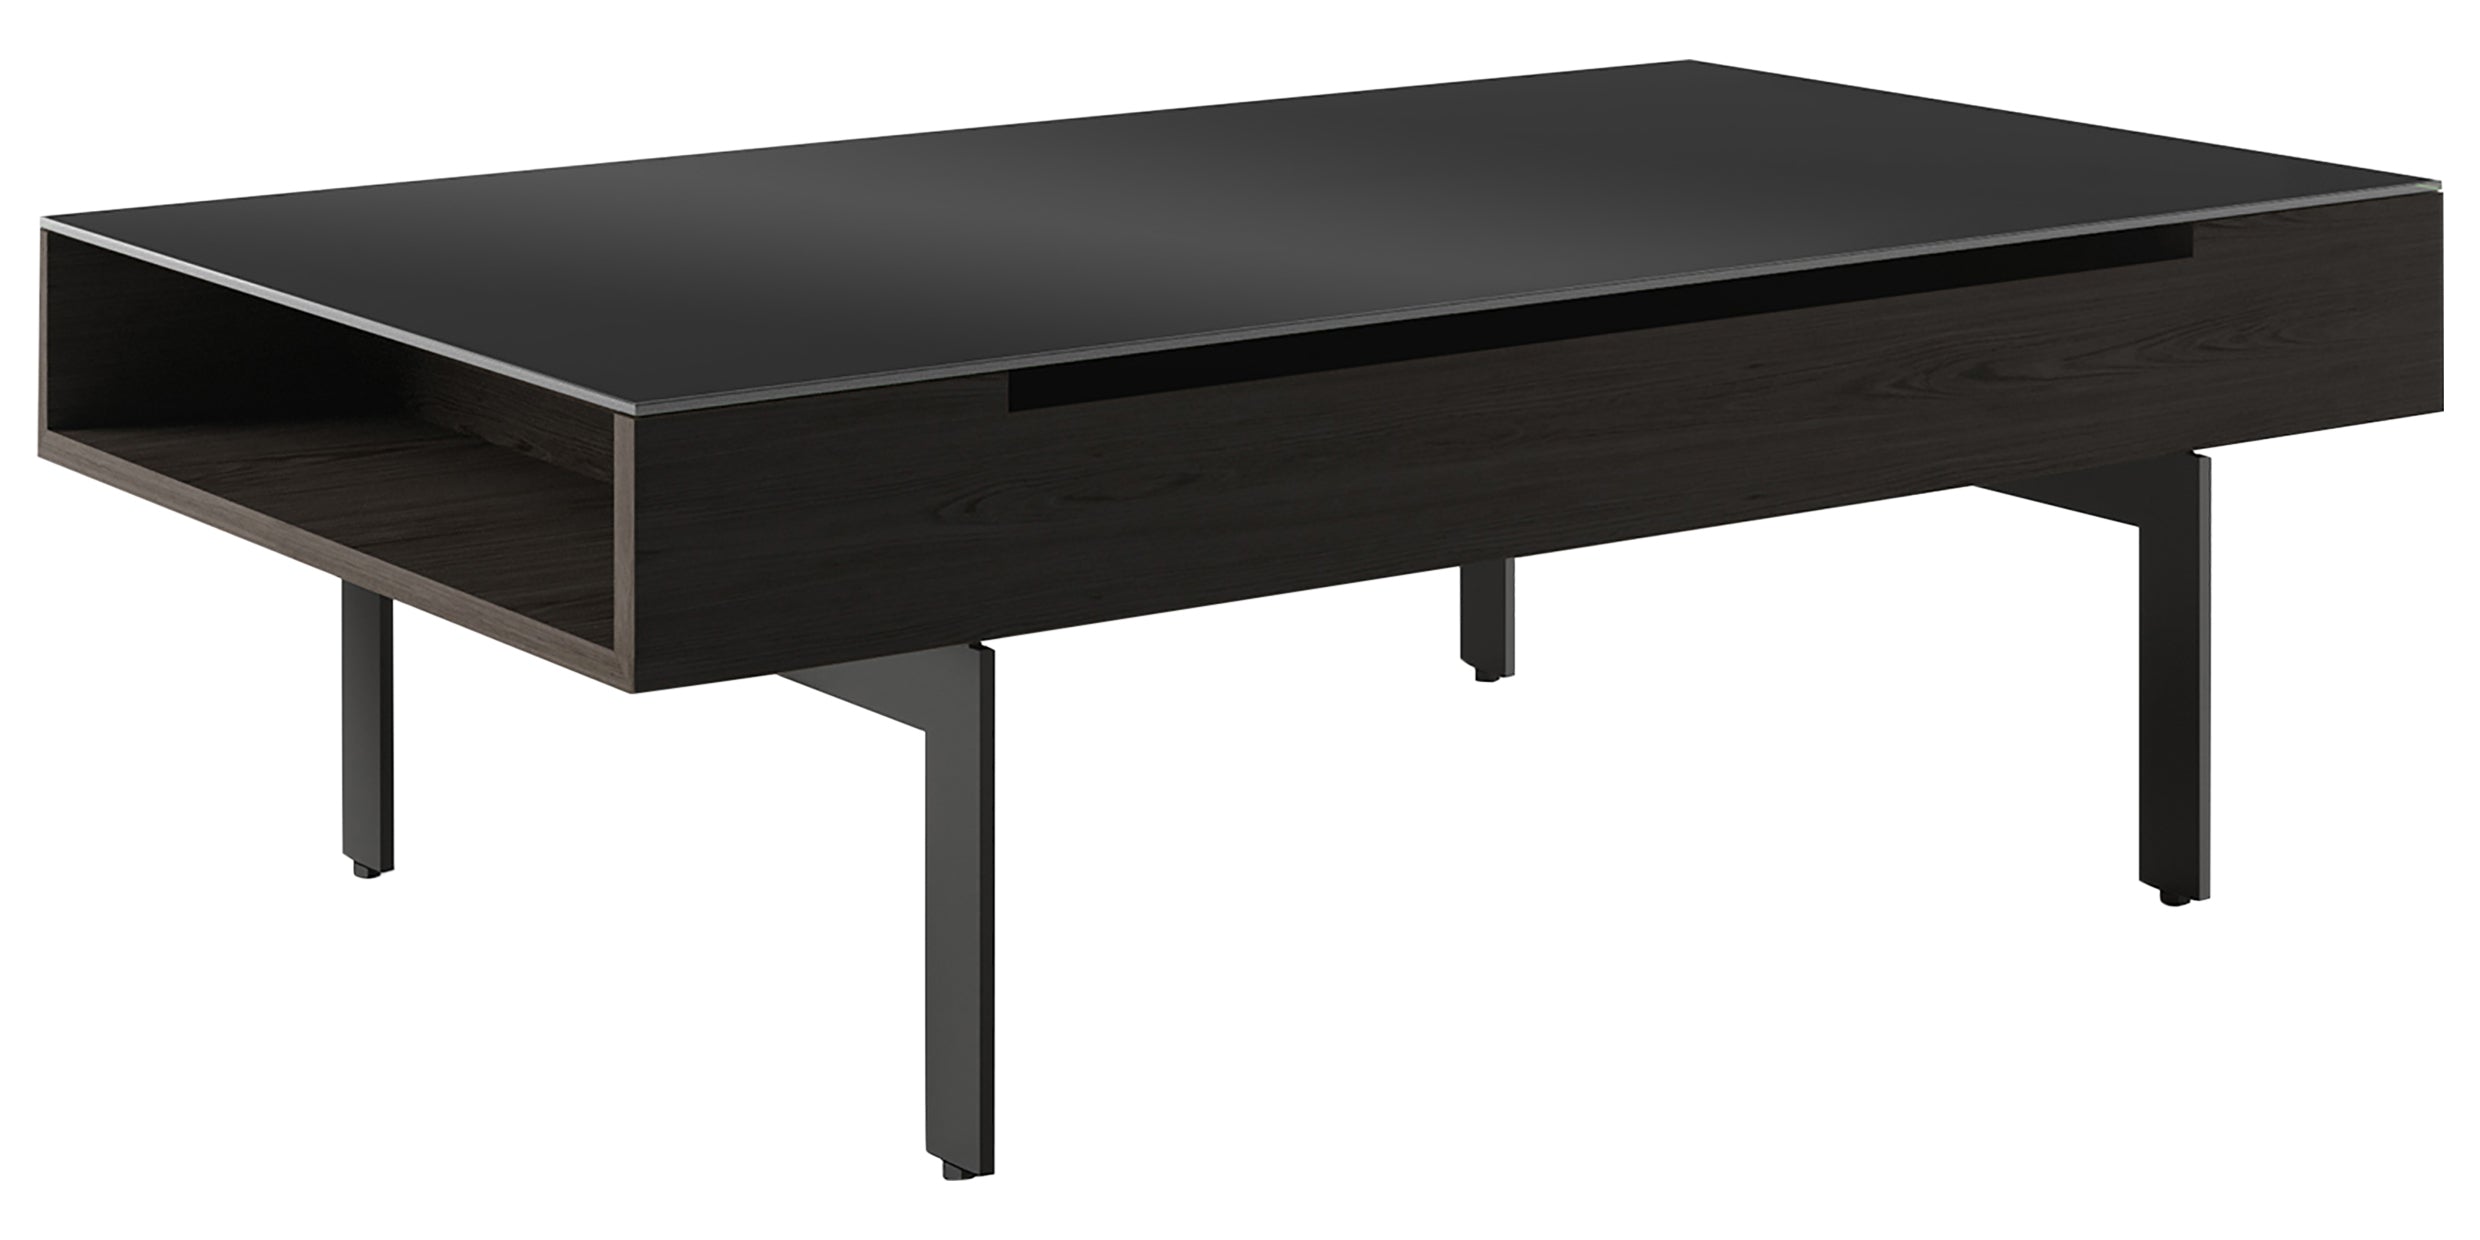 Charcoal Ash Veneer & Black Satin-Etched Glass with Black Steel | BDI Reveal Lift Coffee Table | Valley Ridge Furniture